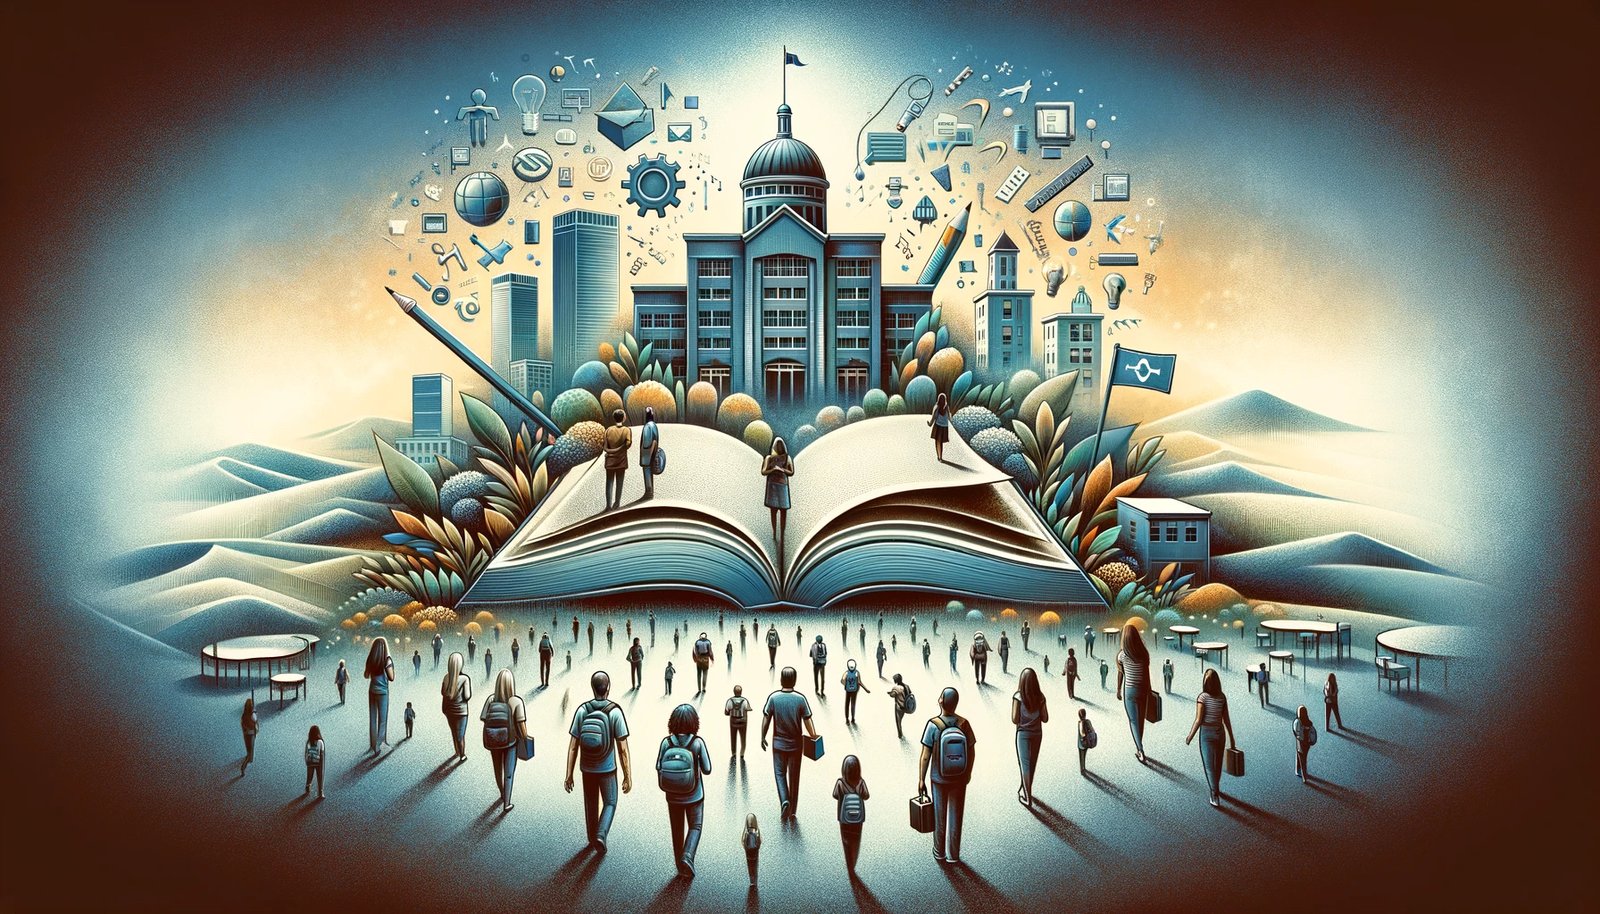 Modern and classical fusion of libertarian schooling concepts, featuring an array of students choosing individual learning paths, an open book for the freedom of education, against a backdrop of minimalistic educational institutions, embodying the essence of privatization and innovation in schooling.